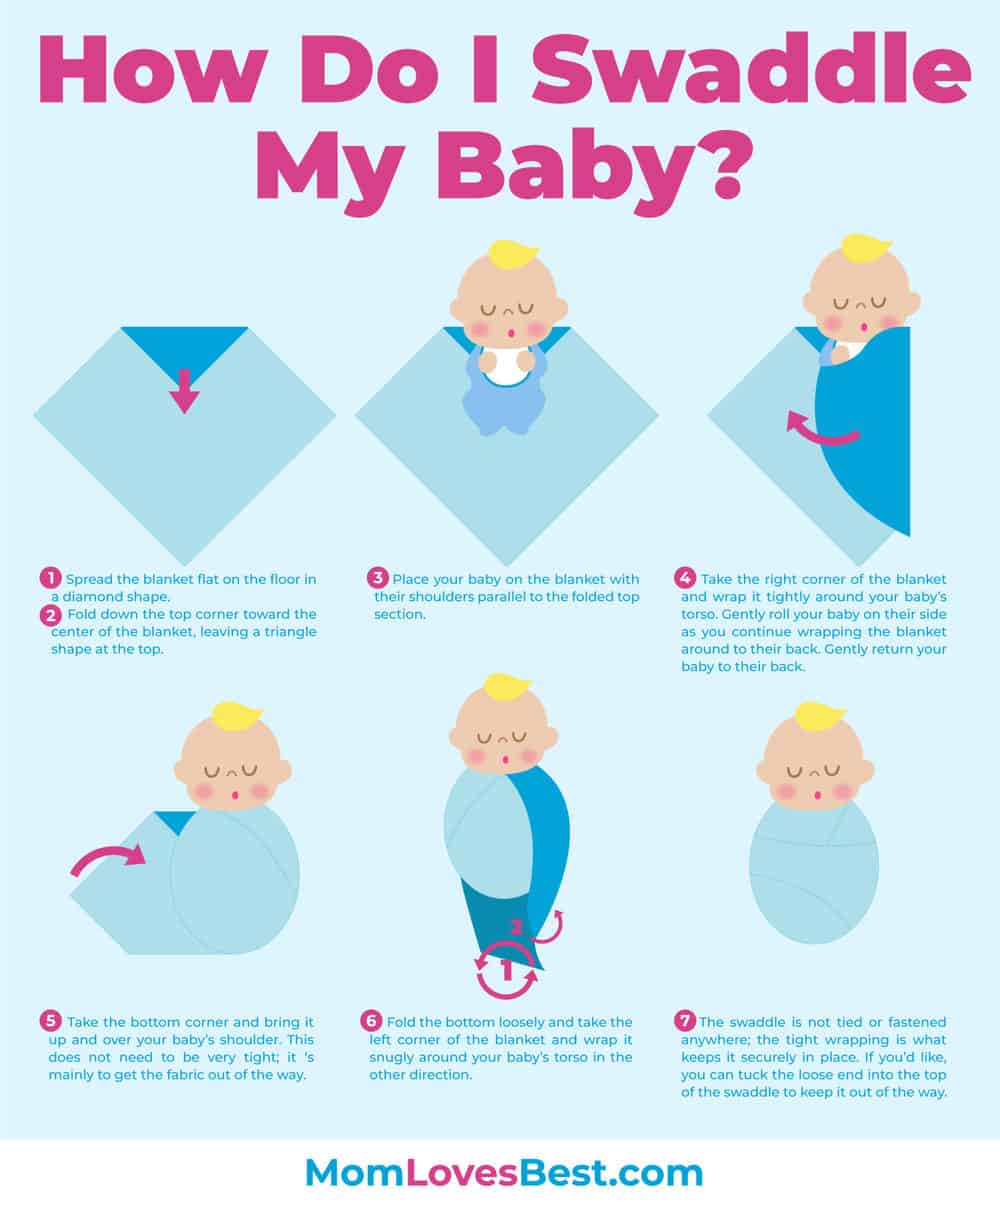 How to Swaddle Baby with Swaddle Blanket